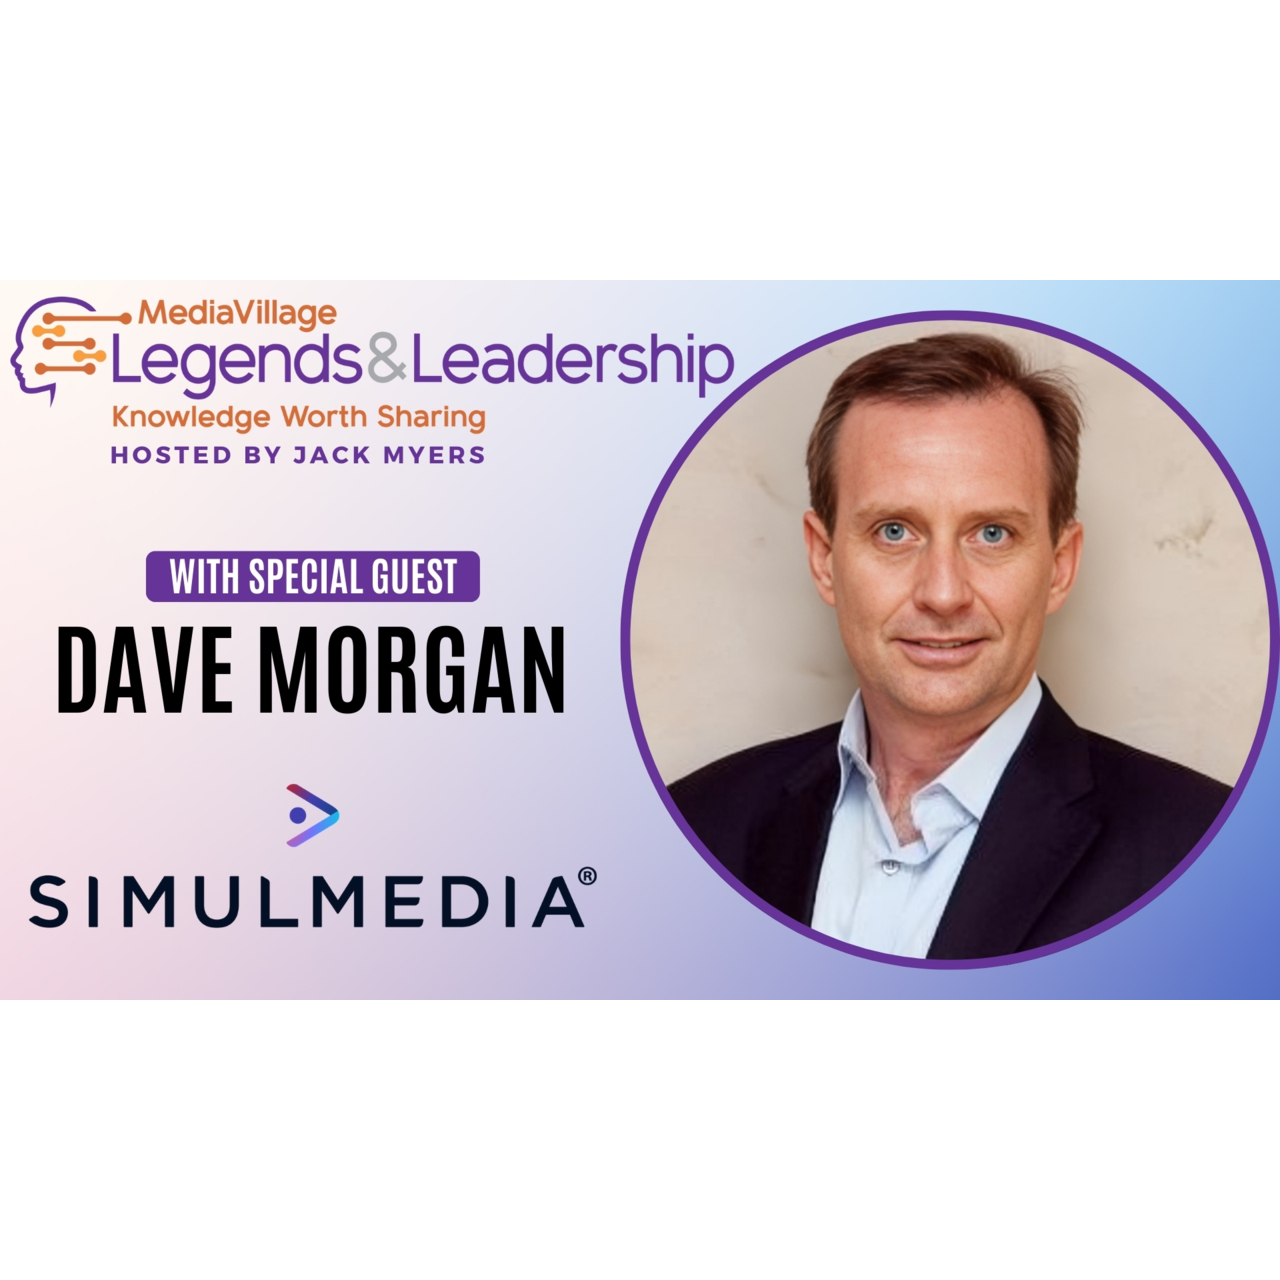 Cover image for  article: Dave Morgan of Simulmedia Challenges Advertisers: "After Cutting Costs, Is Your Growth Engine Still Running?" (VIDEO)